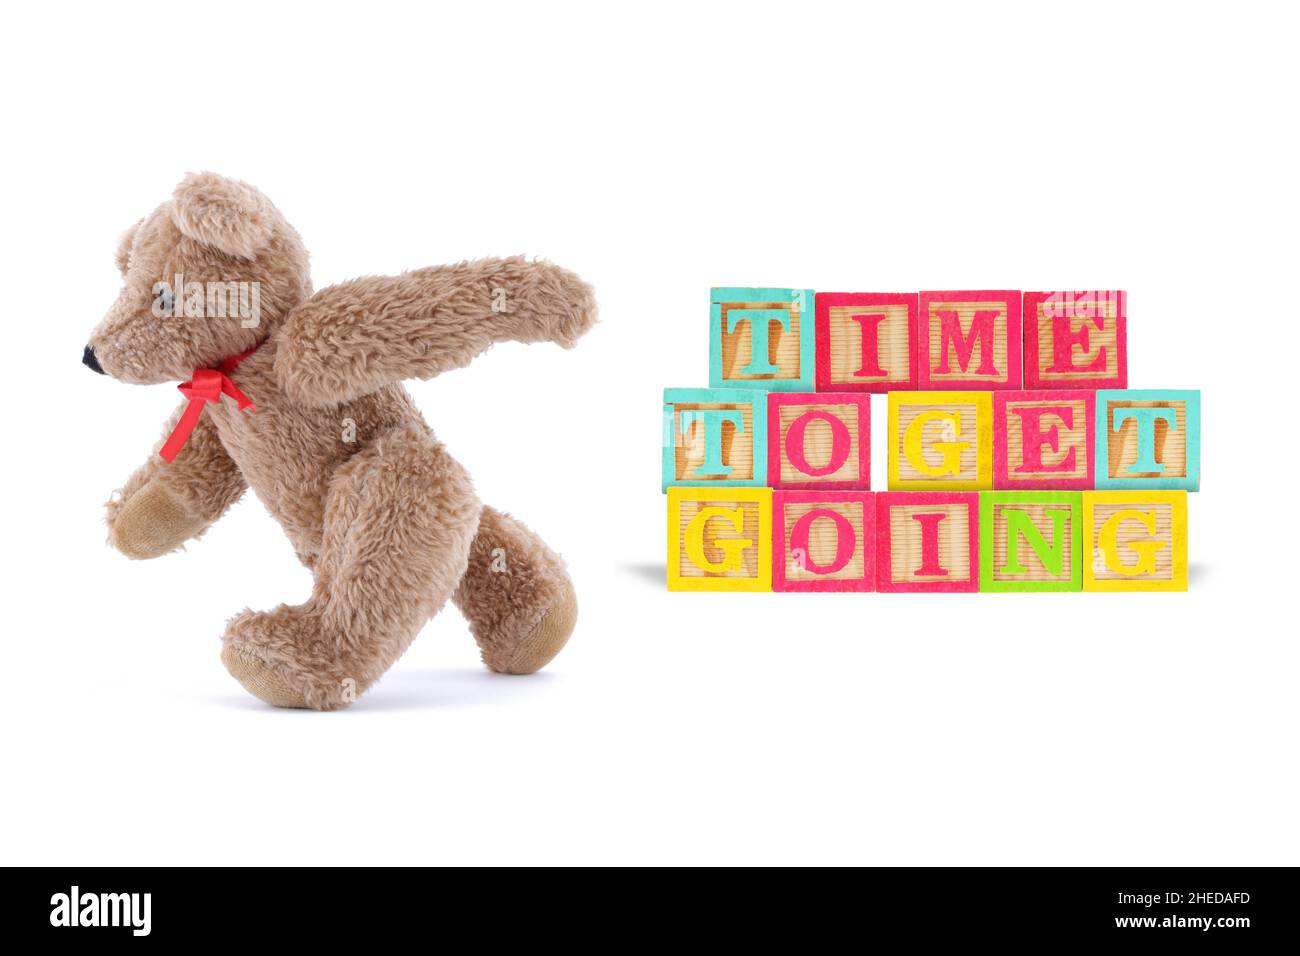 Time to get going business concept with wood blocks and teddy bear Stock Photo